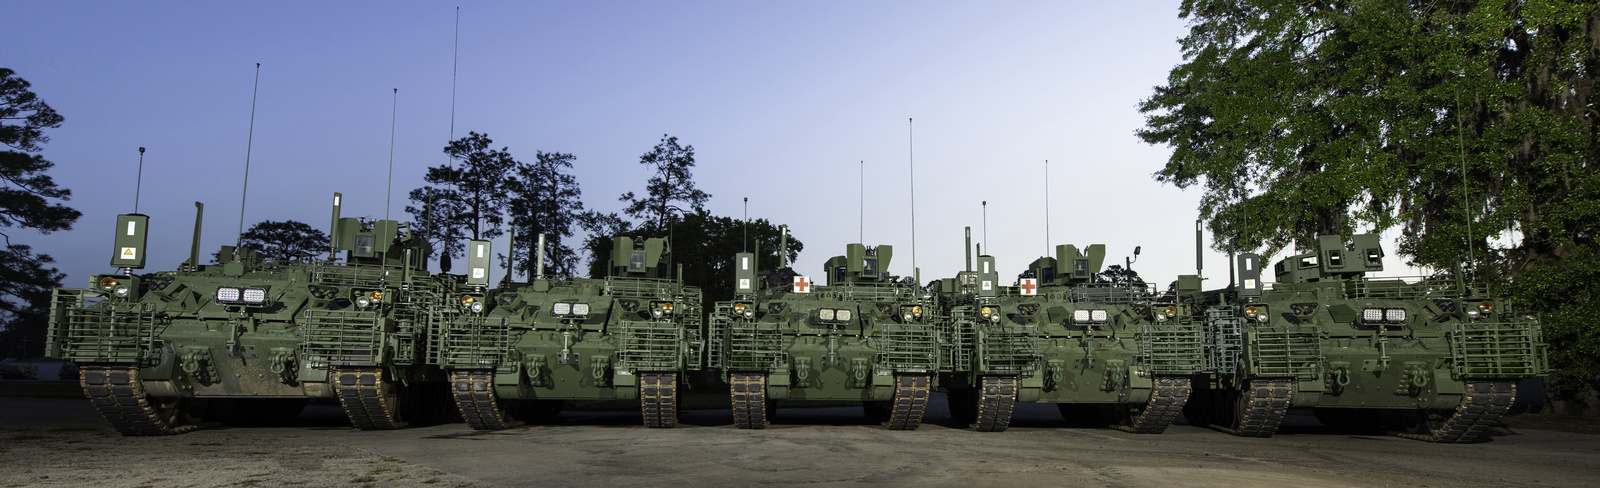 Several green army vehicles lined up